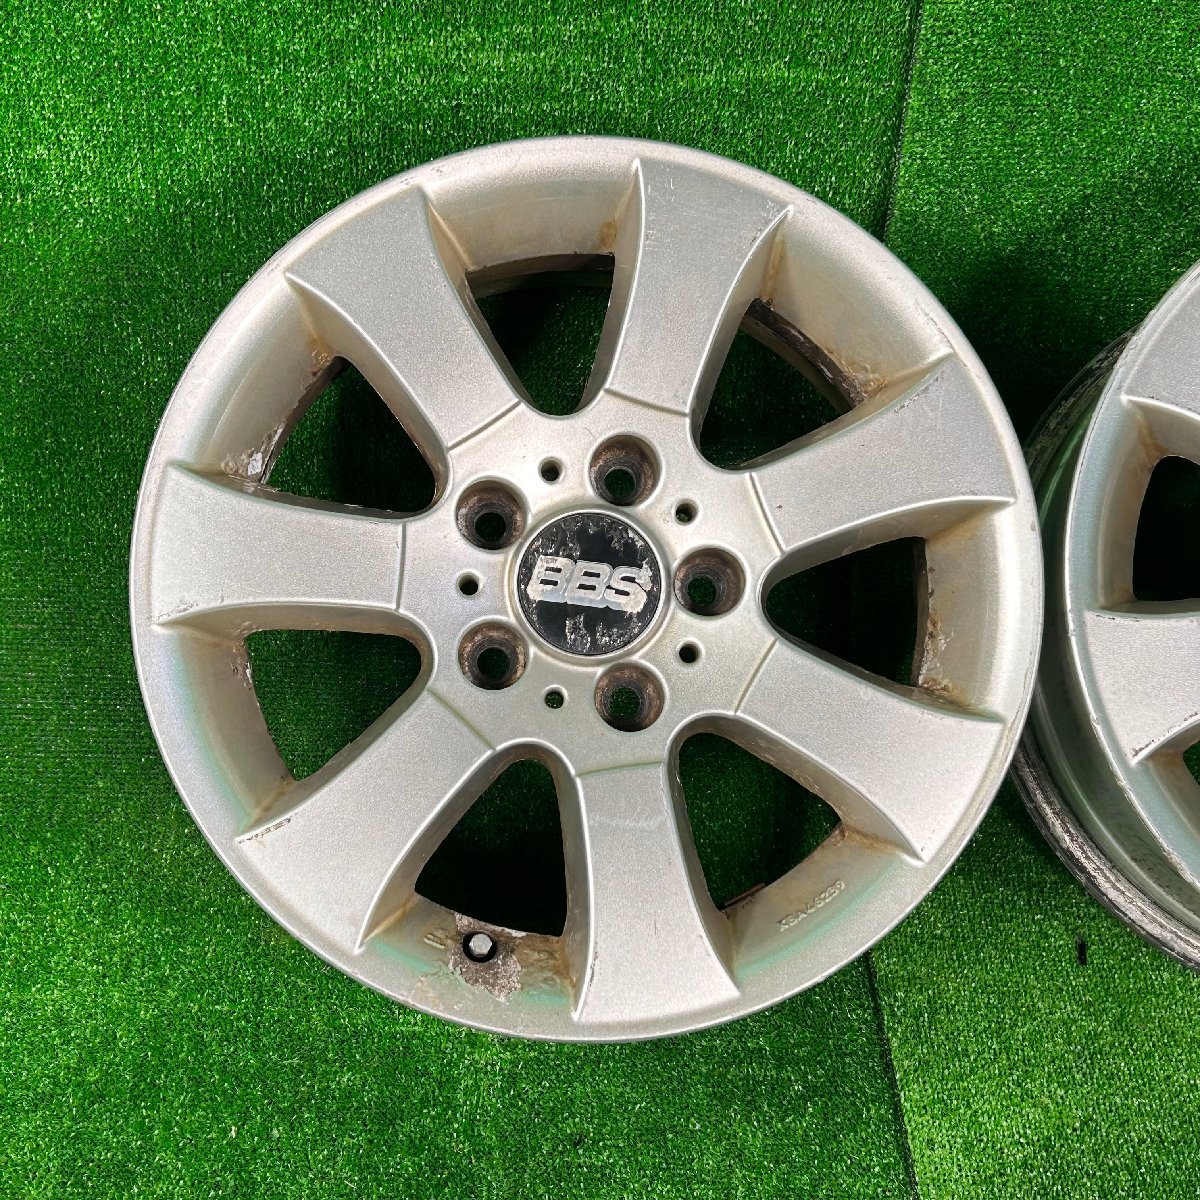 16×7j 5h ＋34 120 BBS RD 345 BMW 純正 OP 希少 オプション アルミ ホイール ホイル 16 インチ in 5穴 pcd 4本 菅16-174_画像5